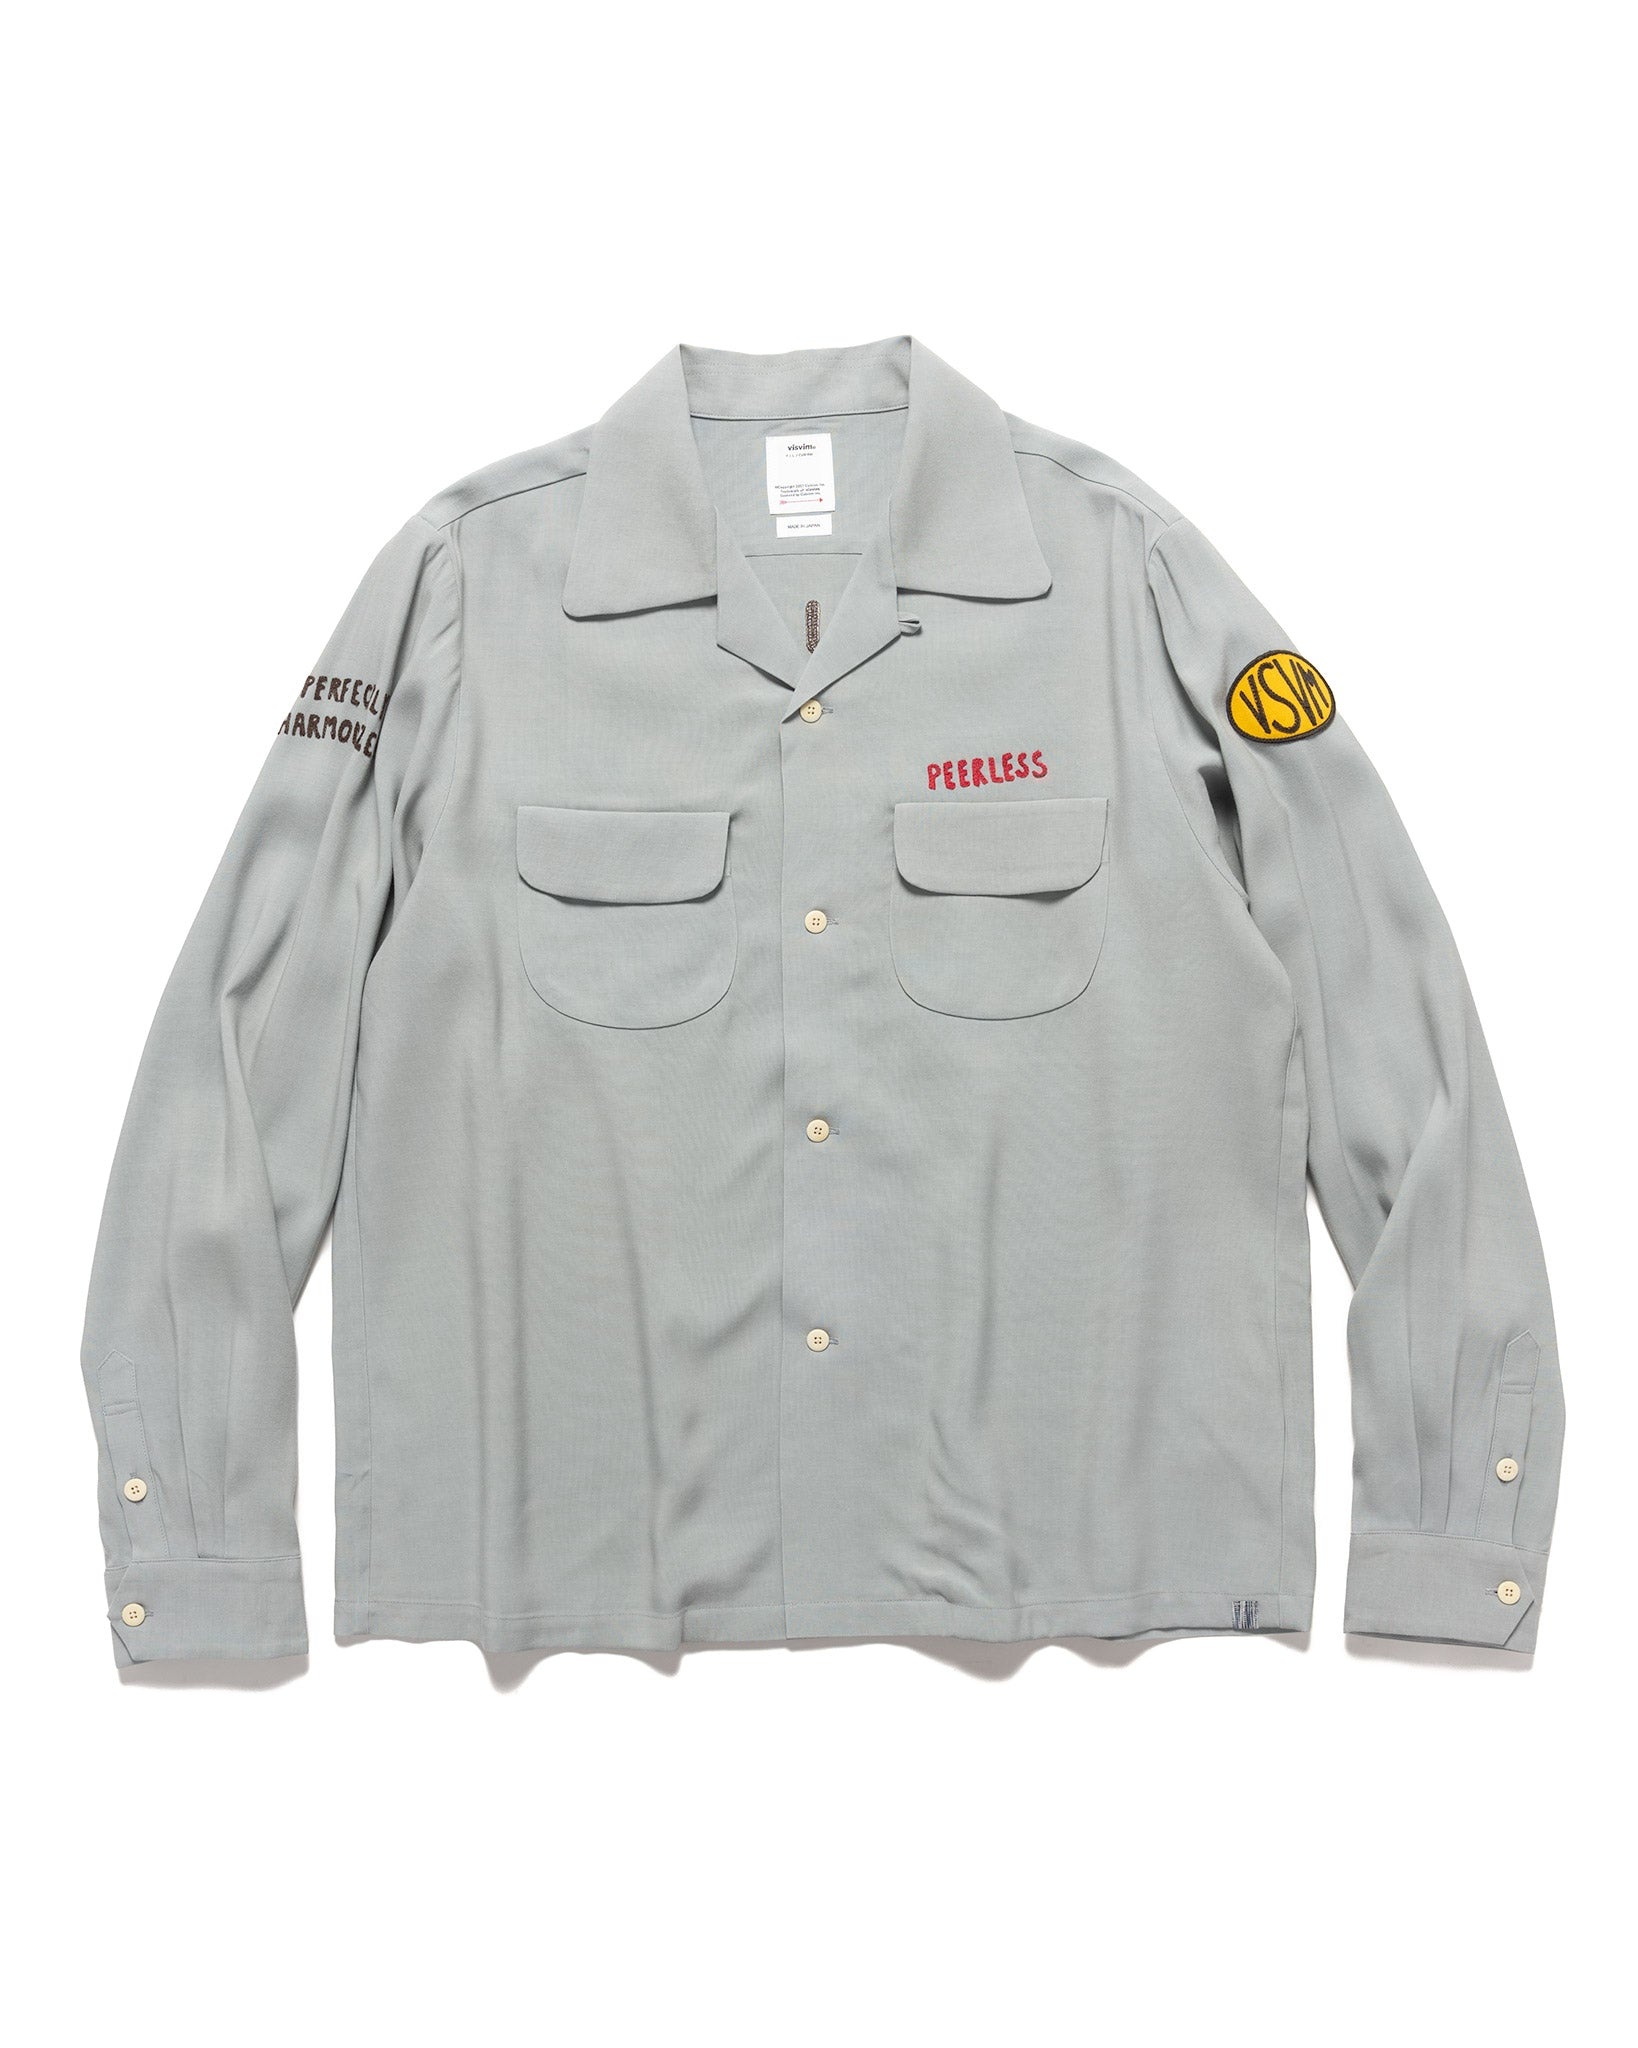 Keesey G.S. Shirt L/S I.Q.W.T. Grey - 1